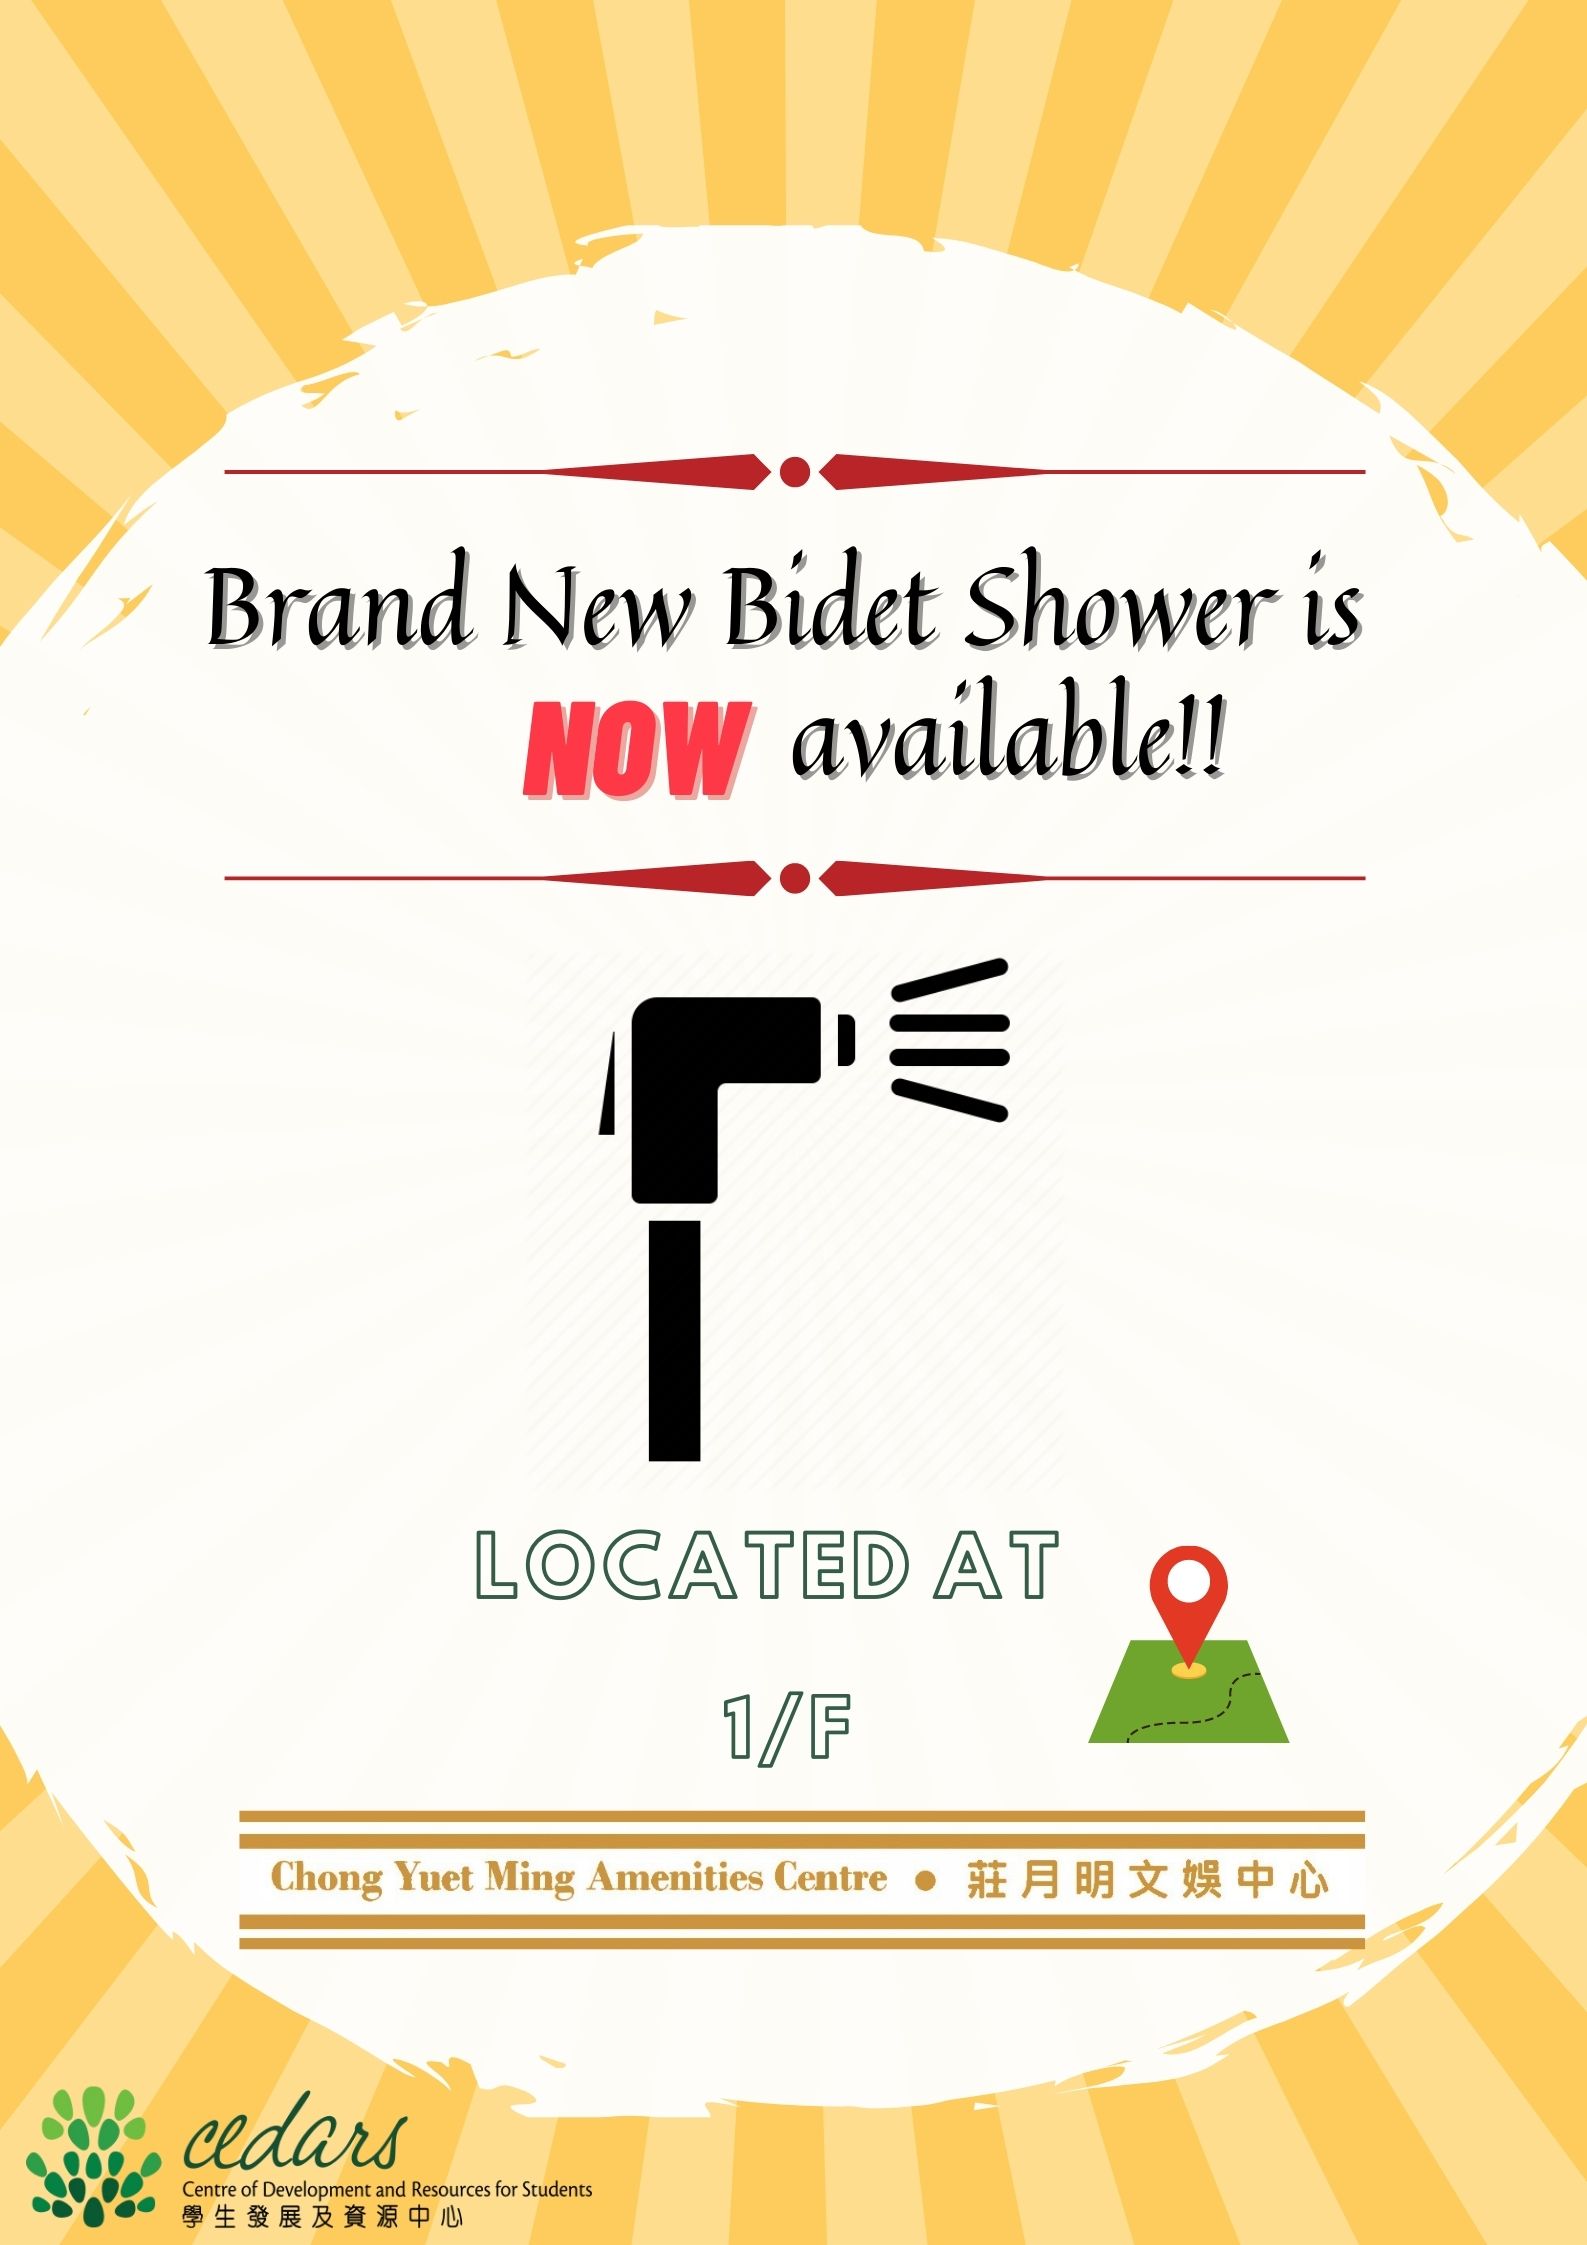 Brand new Bidet Shower is NOW available